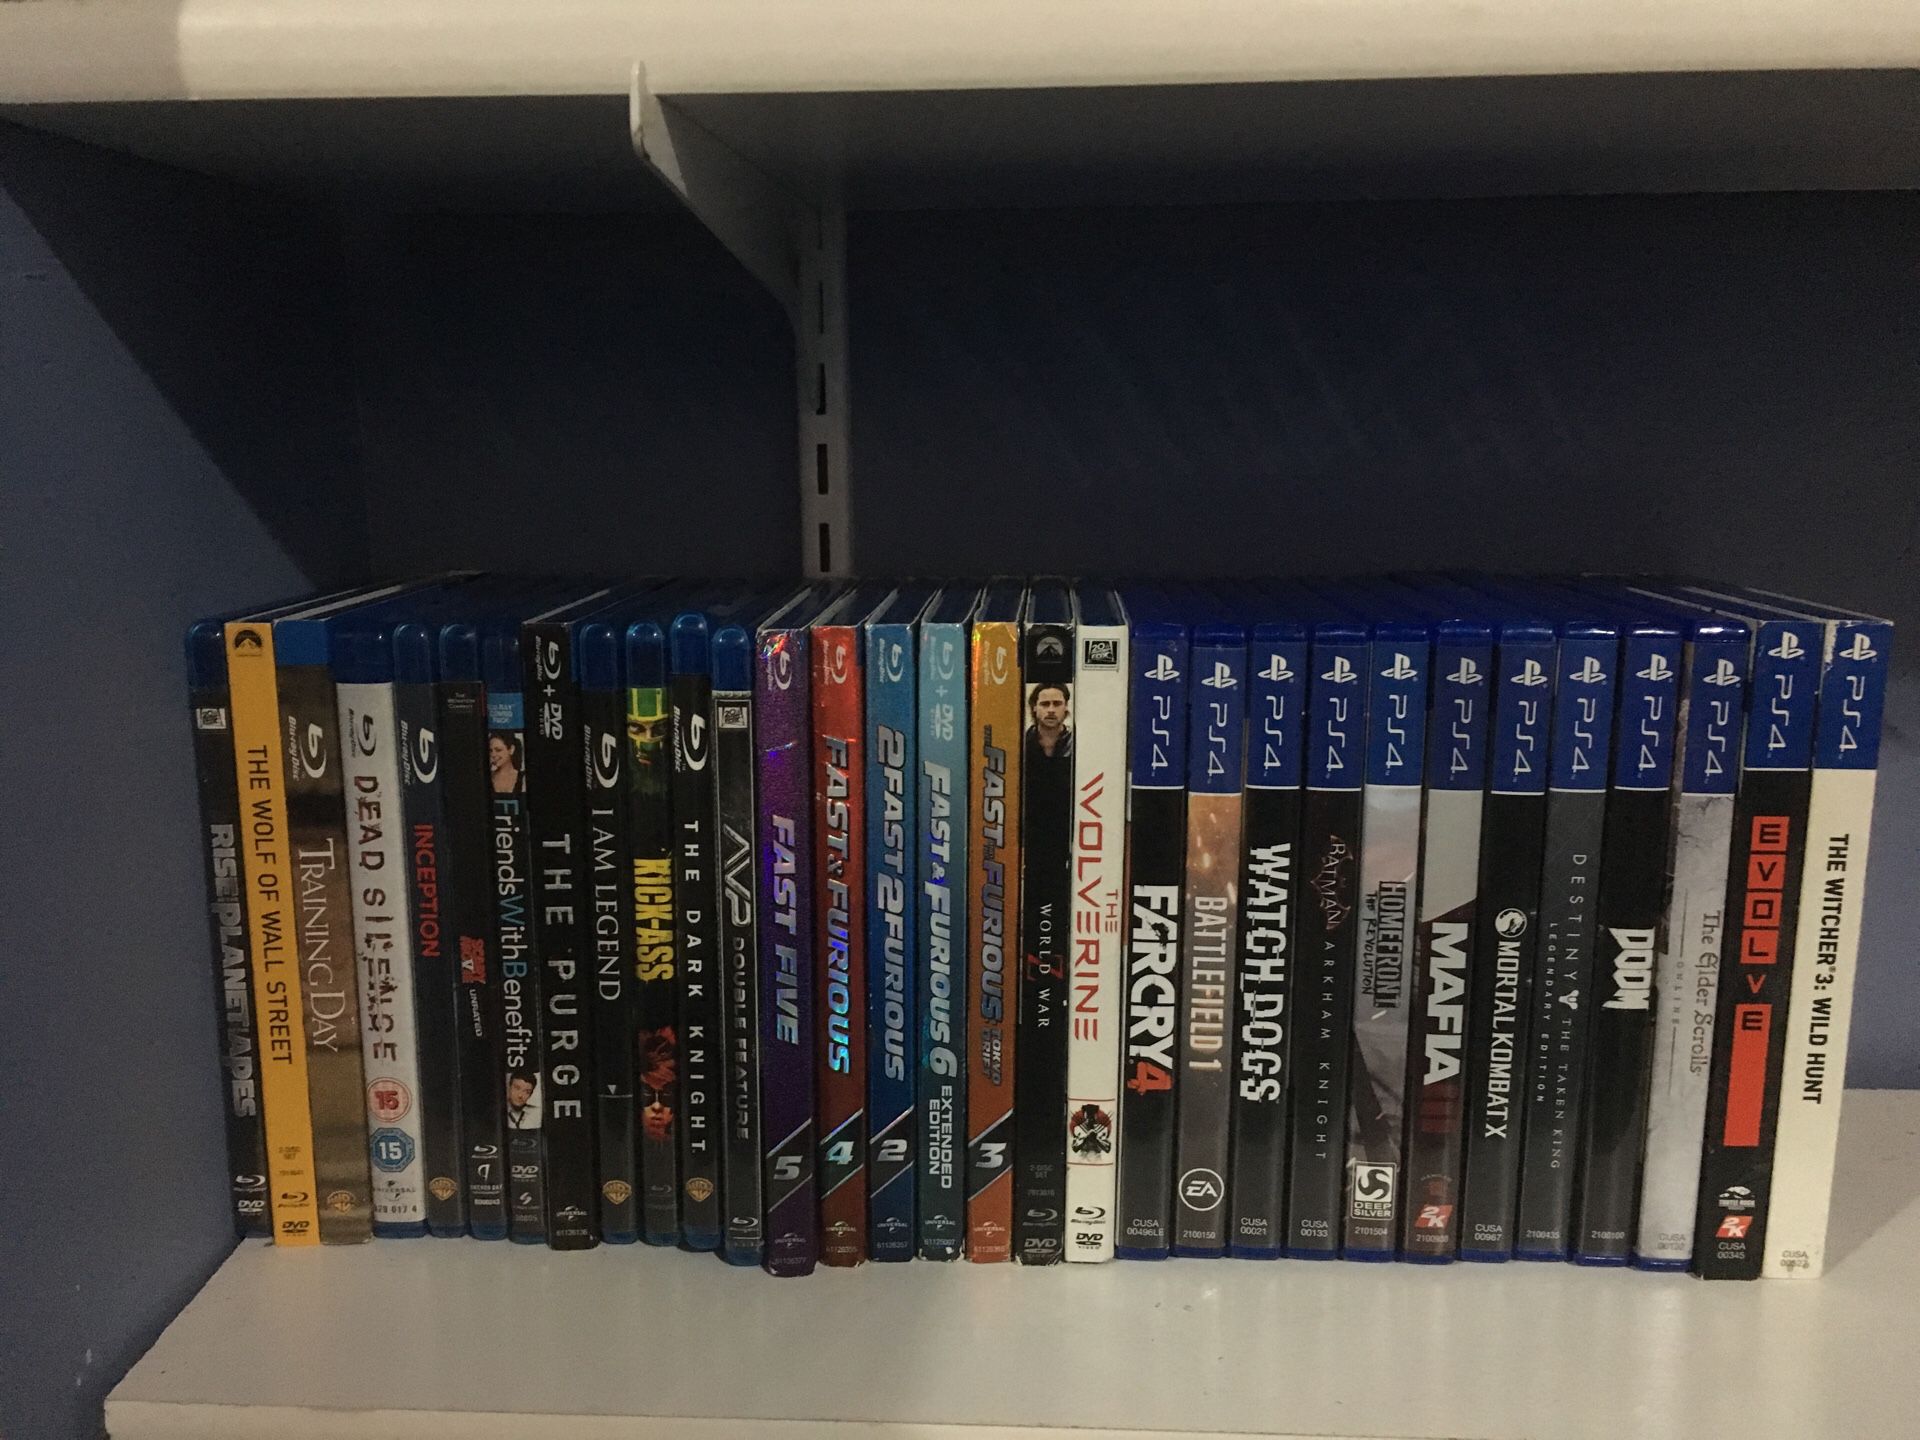 Blue Ray Movies / Ps4 Games